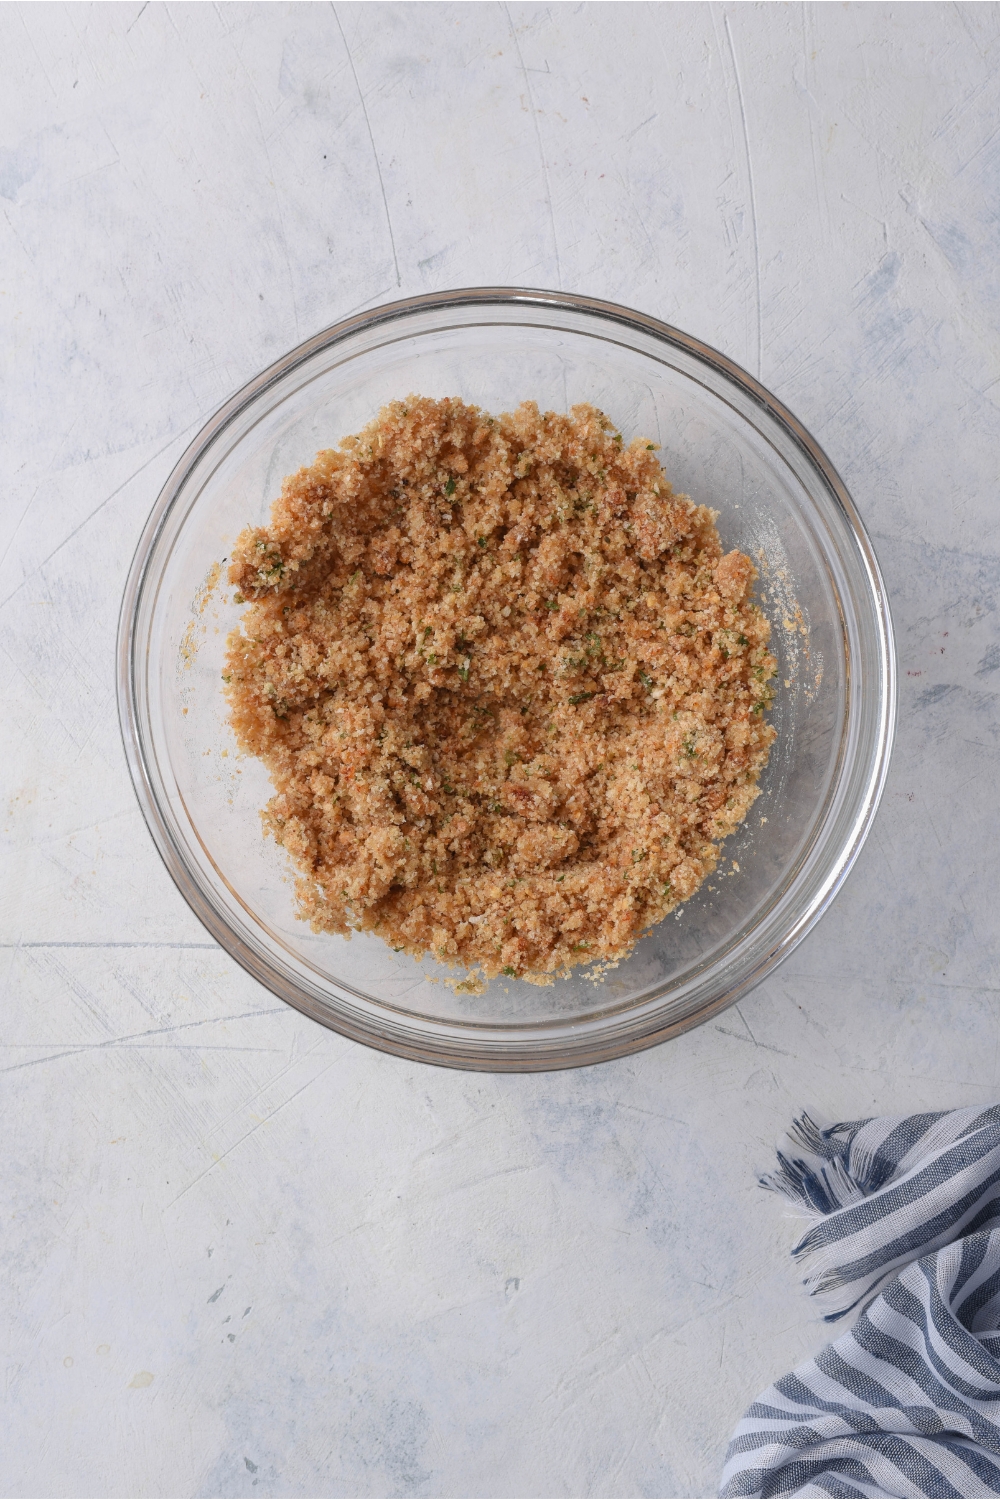 A clear bowl with a homemade seasoning and bread crumb mixture in it.